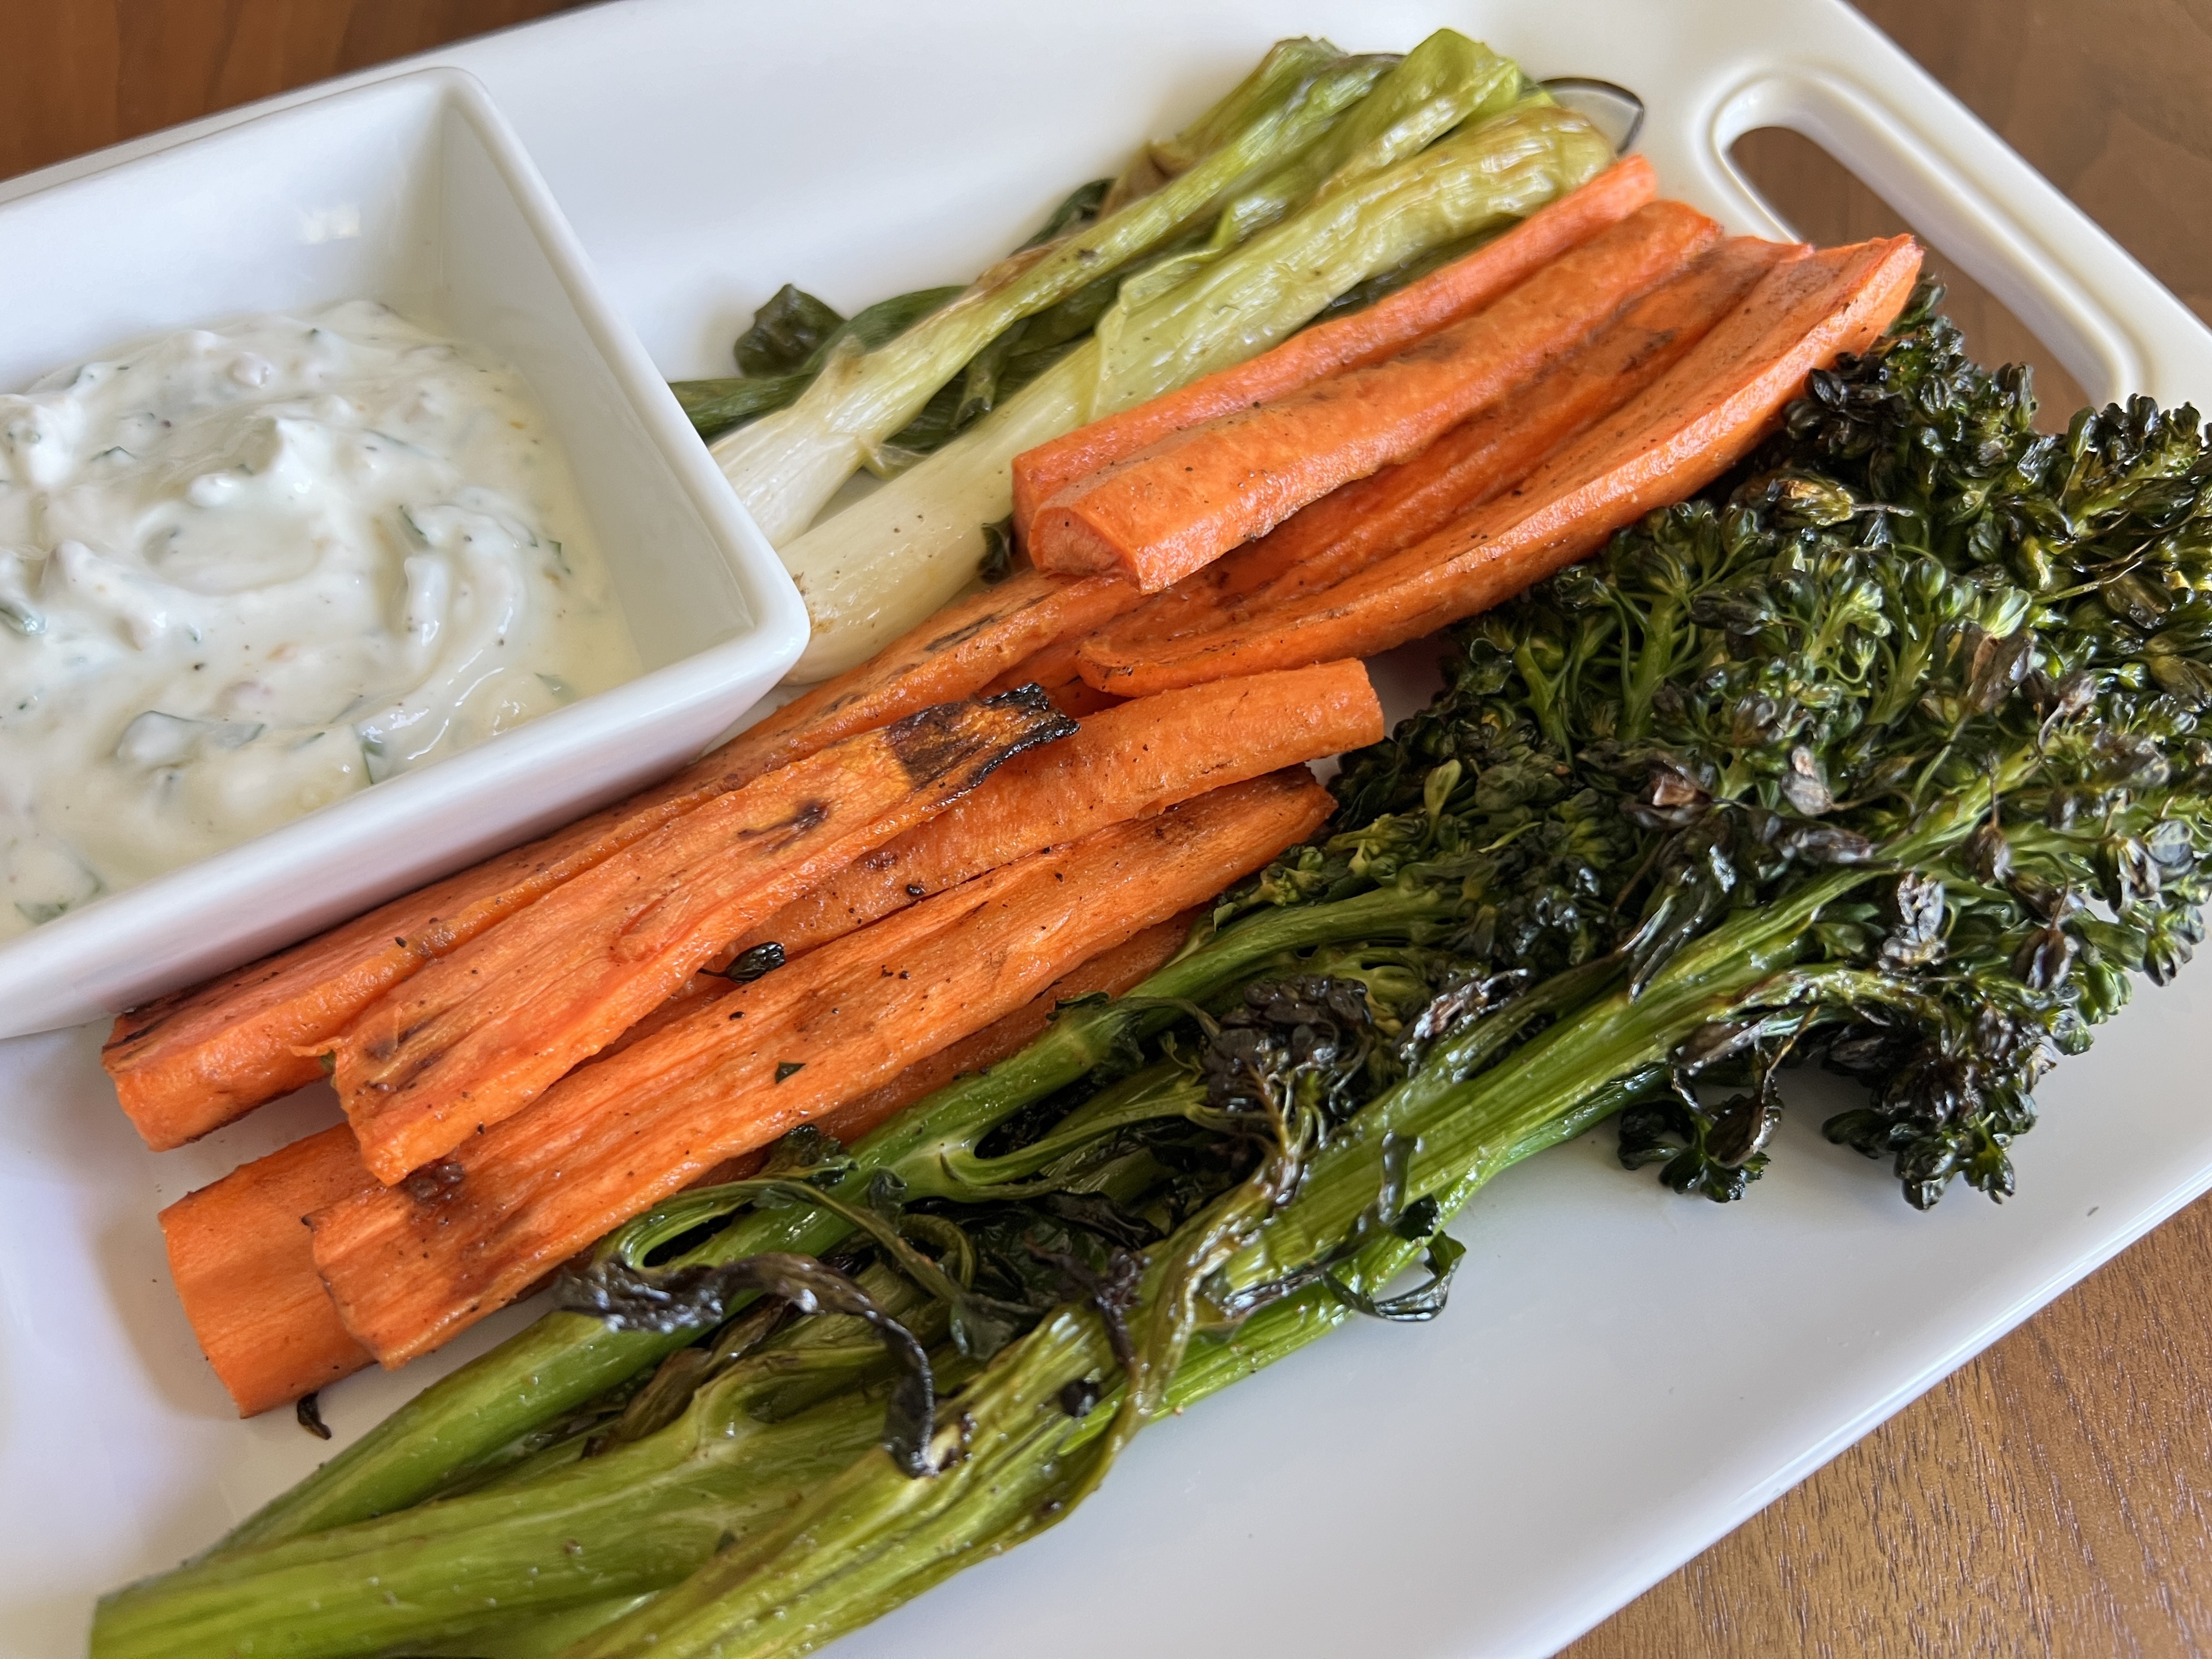 platter of grilled broccolini, carrots and green onions with a dish of mint, pistachio yogurt dressing on the side